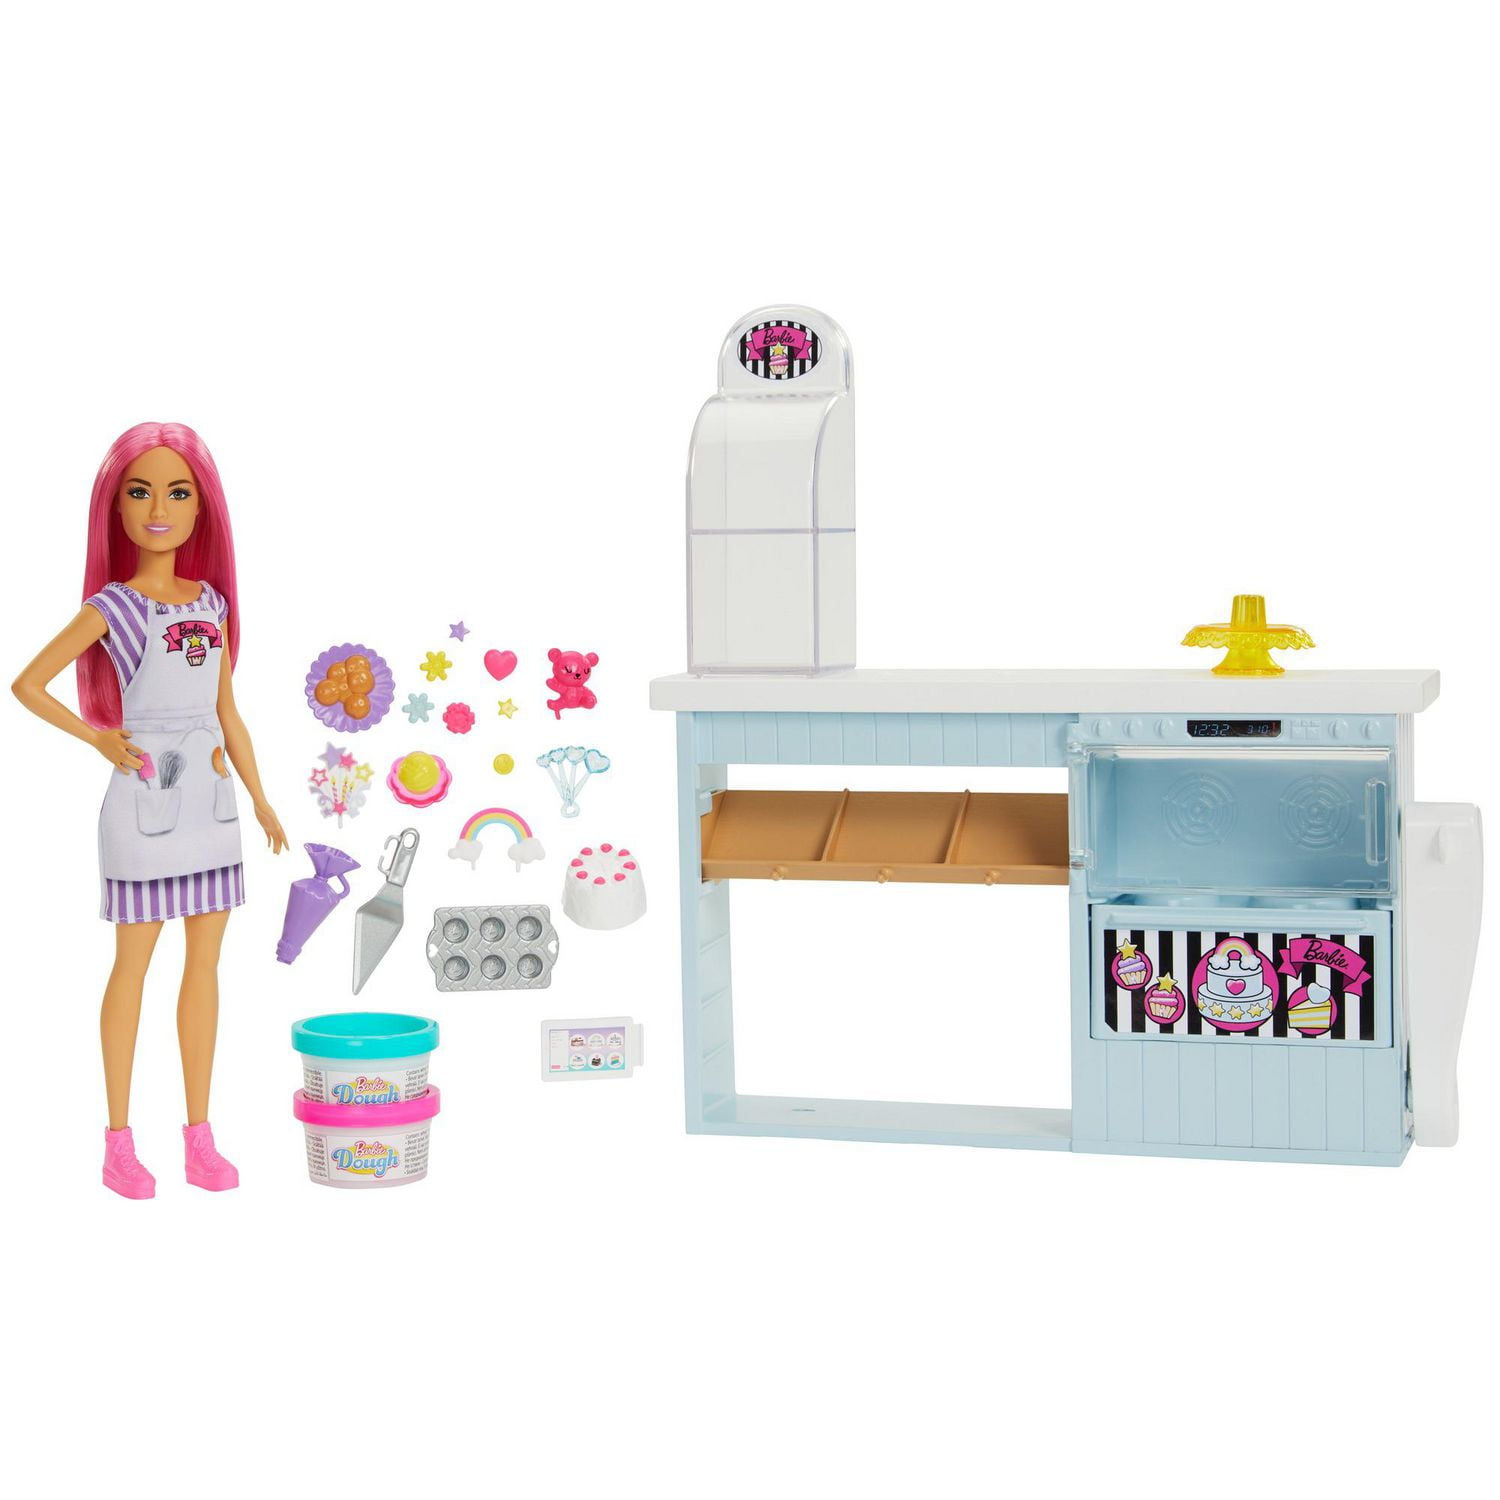 Barbie Bakery Playset with 12 in Petite Doll, Pink Hair, Bakery Station,  Cake Making Feature & 20+ Realistic Play Pieces, 3 & Up